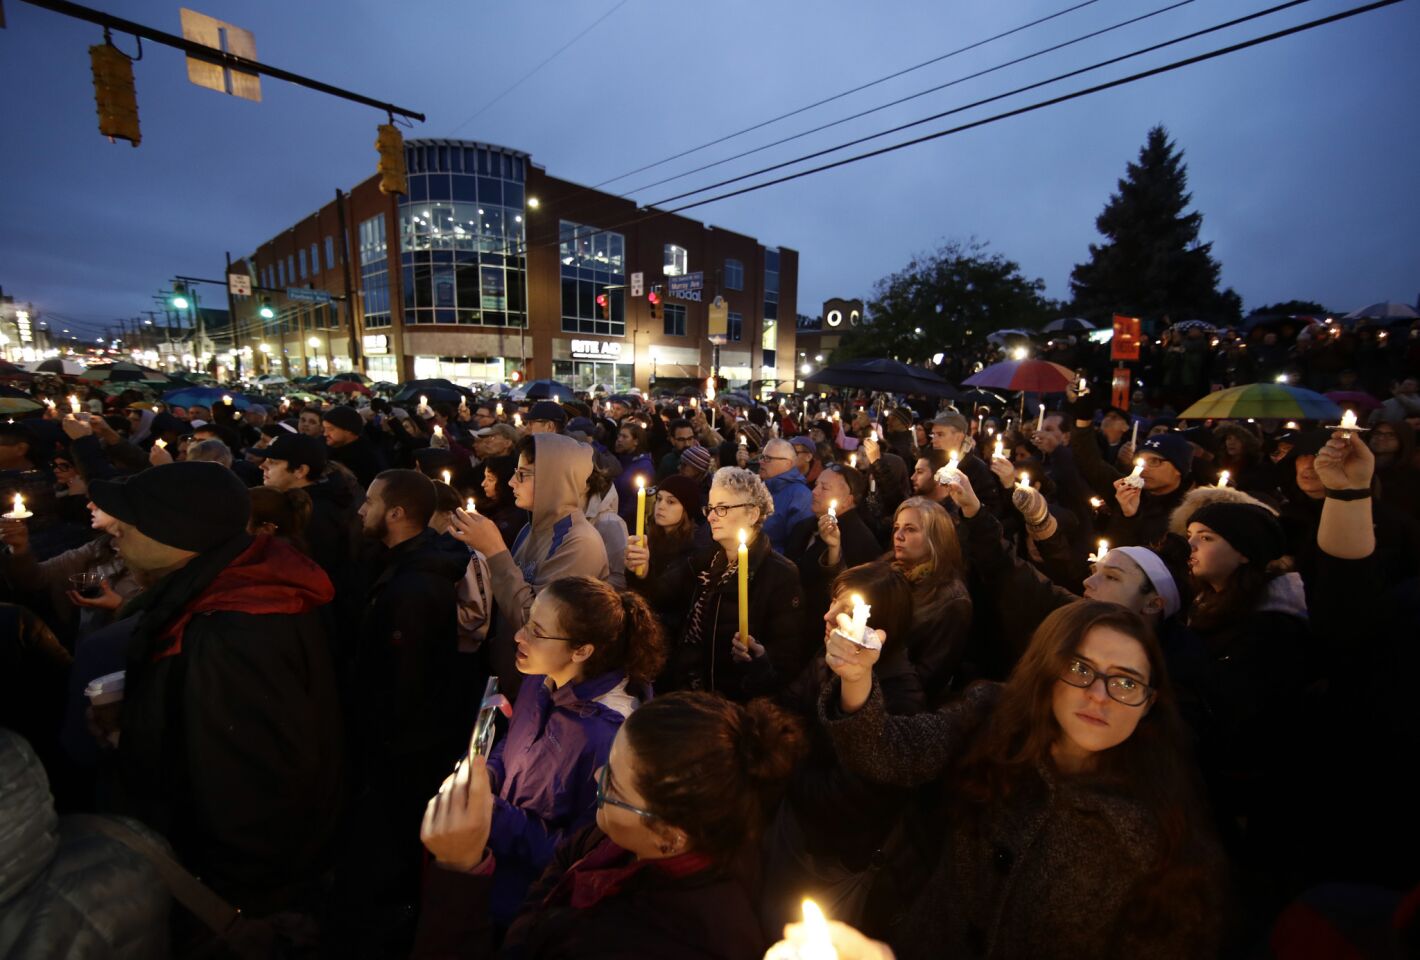 People hold candles as they gather for a vigil in the aftermath of a deadly shooting at the Tree of Life synagogue in the Squirrel Hill neighborhood of Pittsburgh on Oct. 27, 2018.